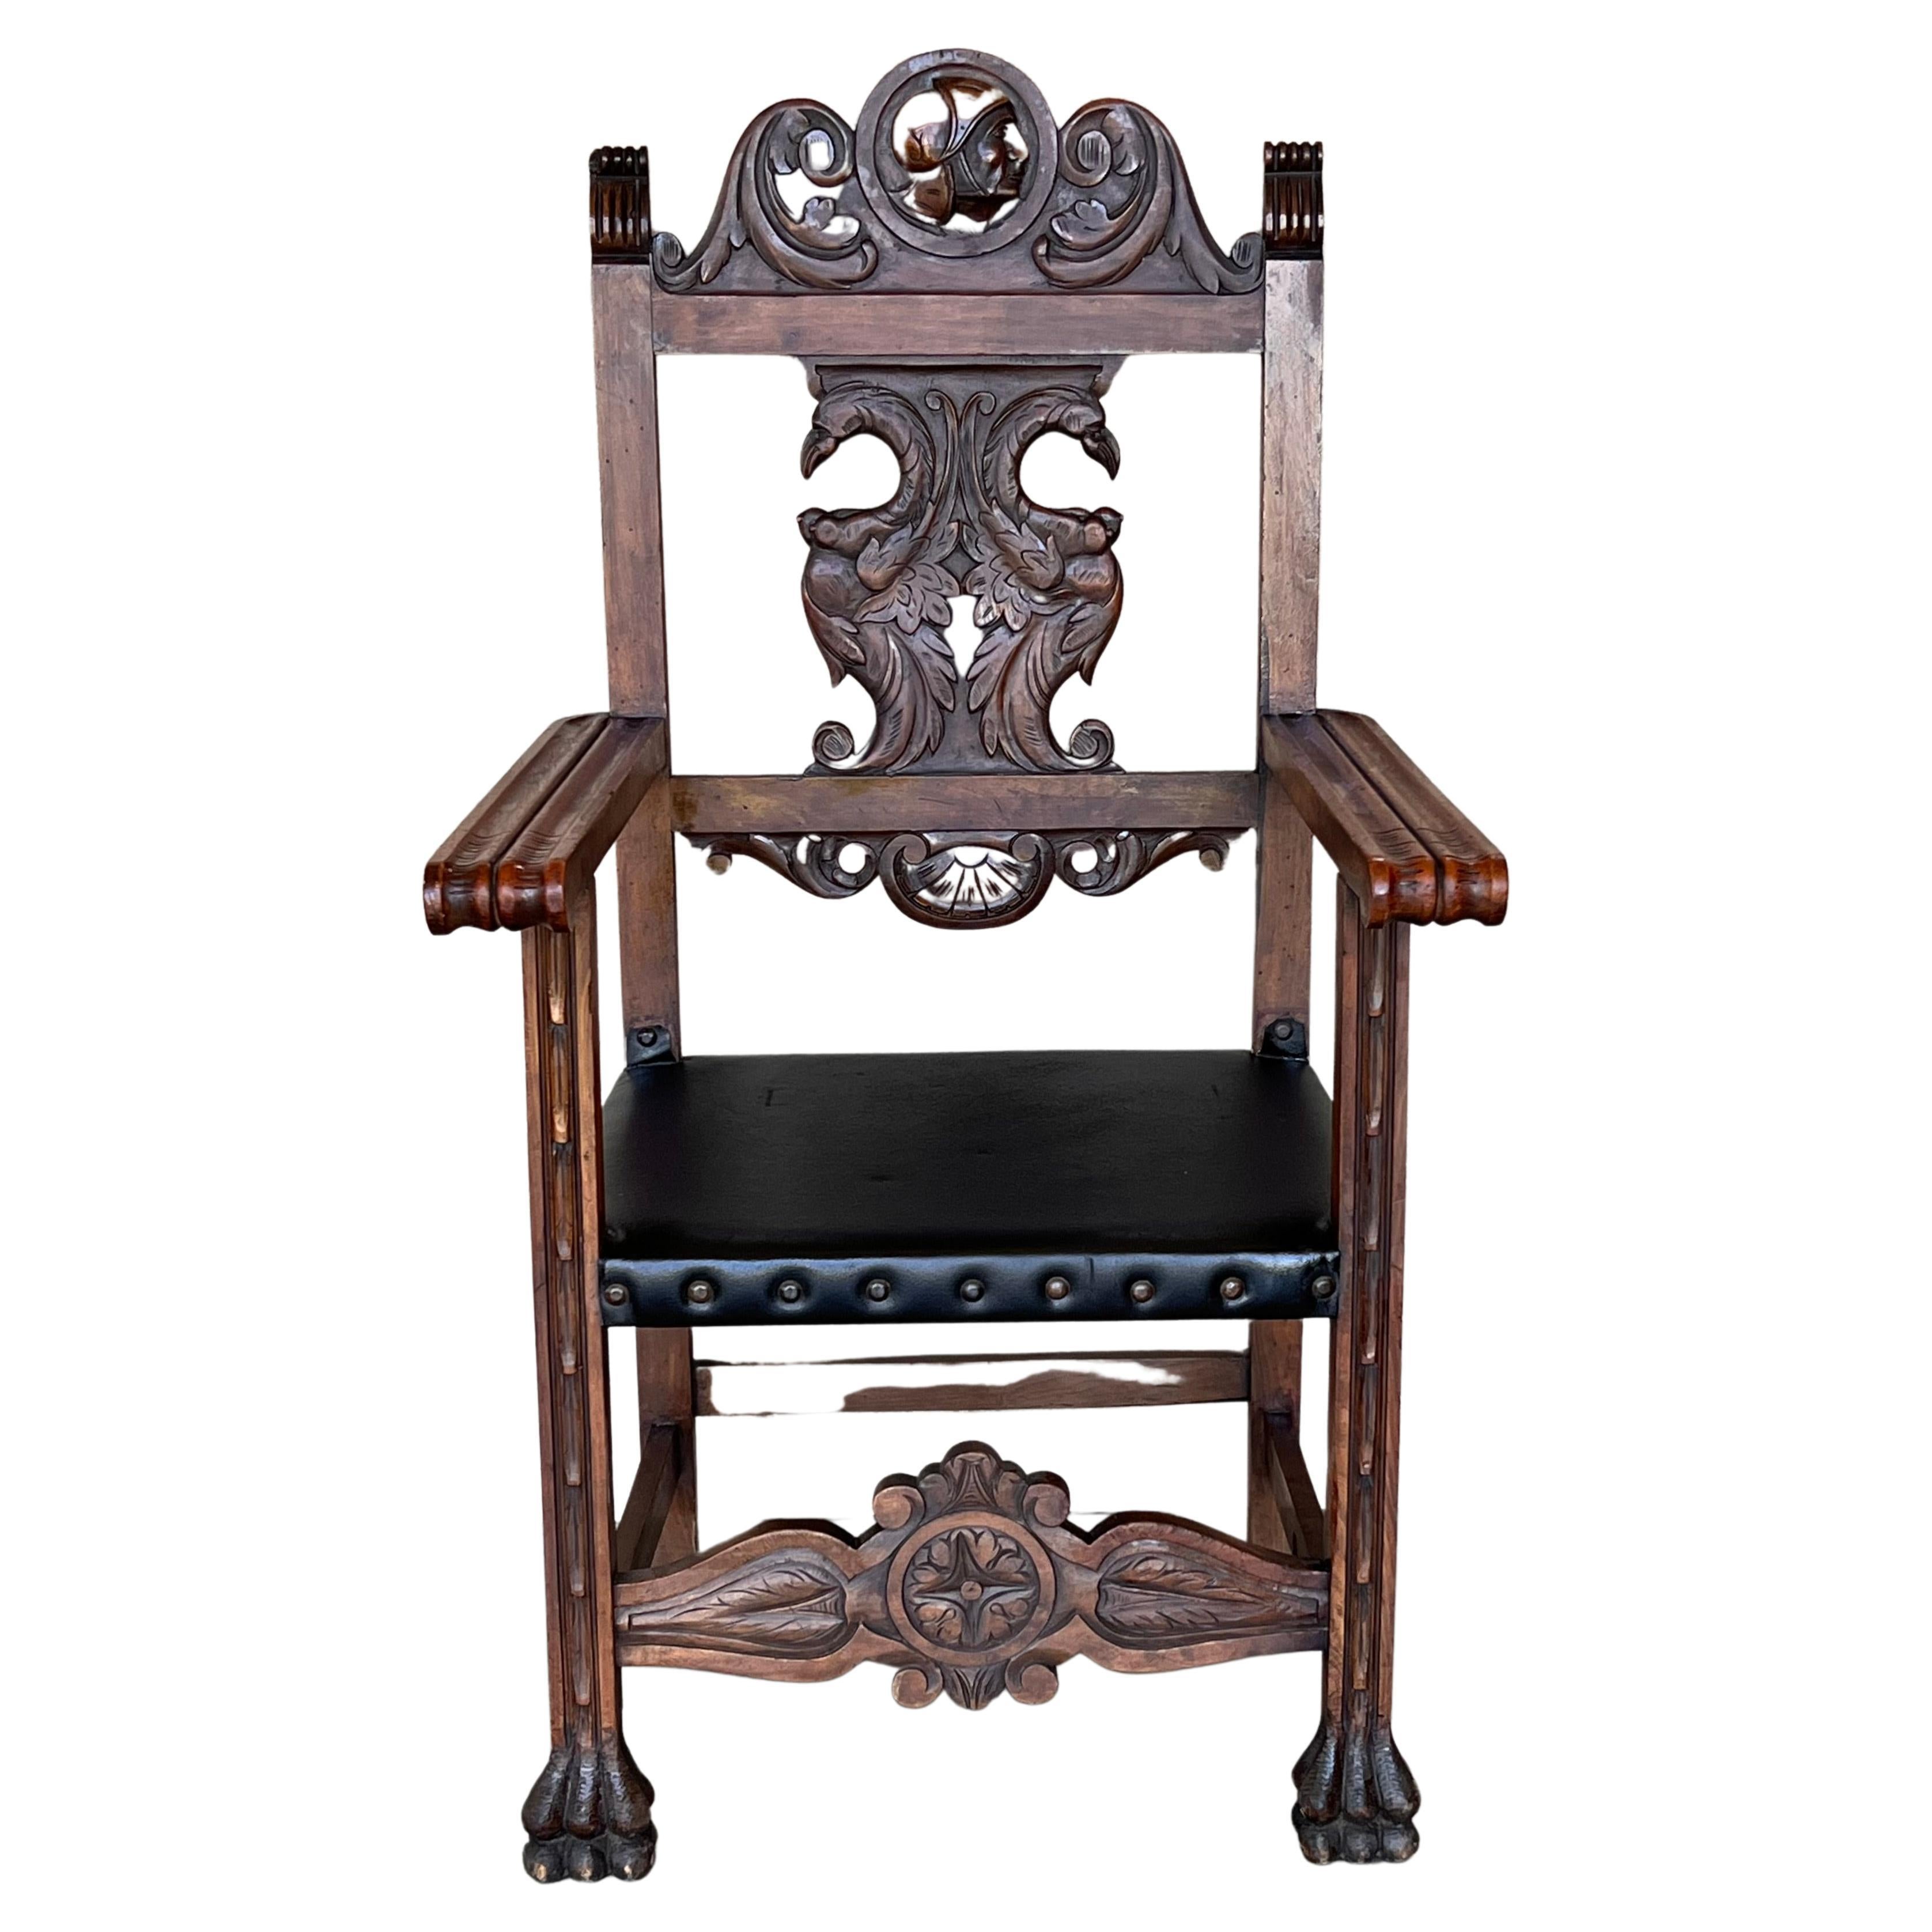 19th Century French Carved Walnut Turned Wood Armchair with Claw Feet